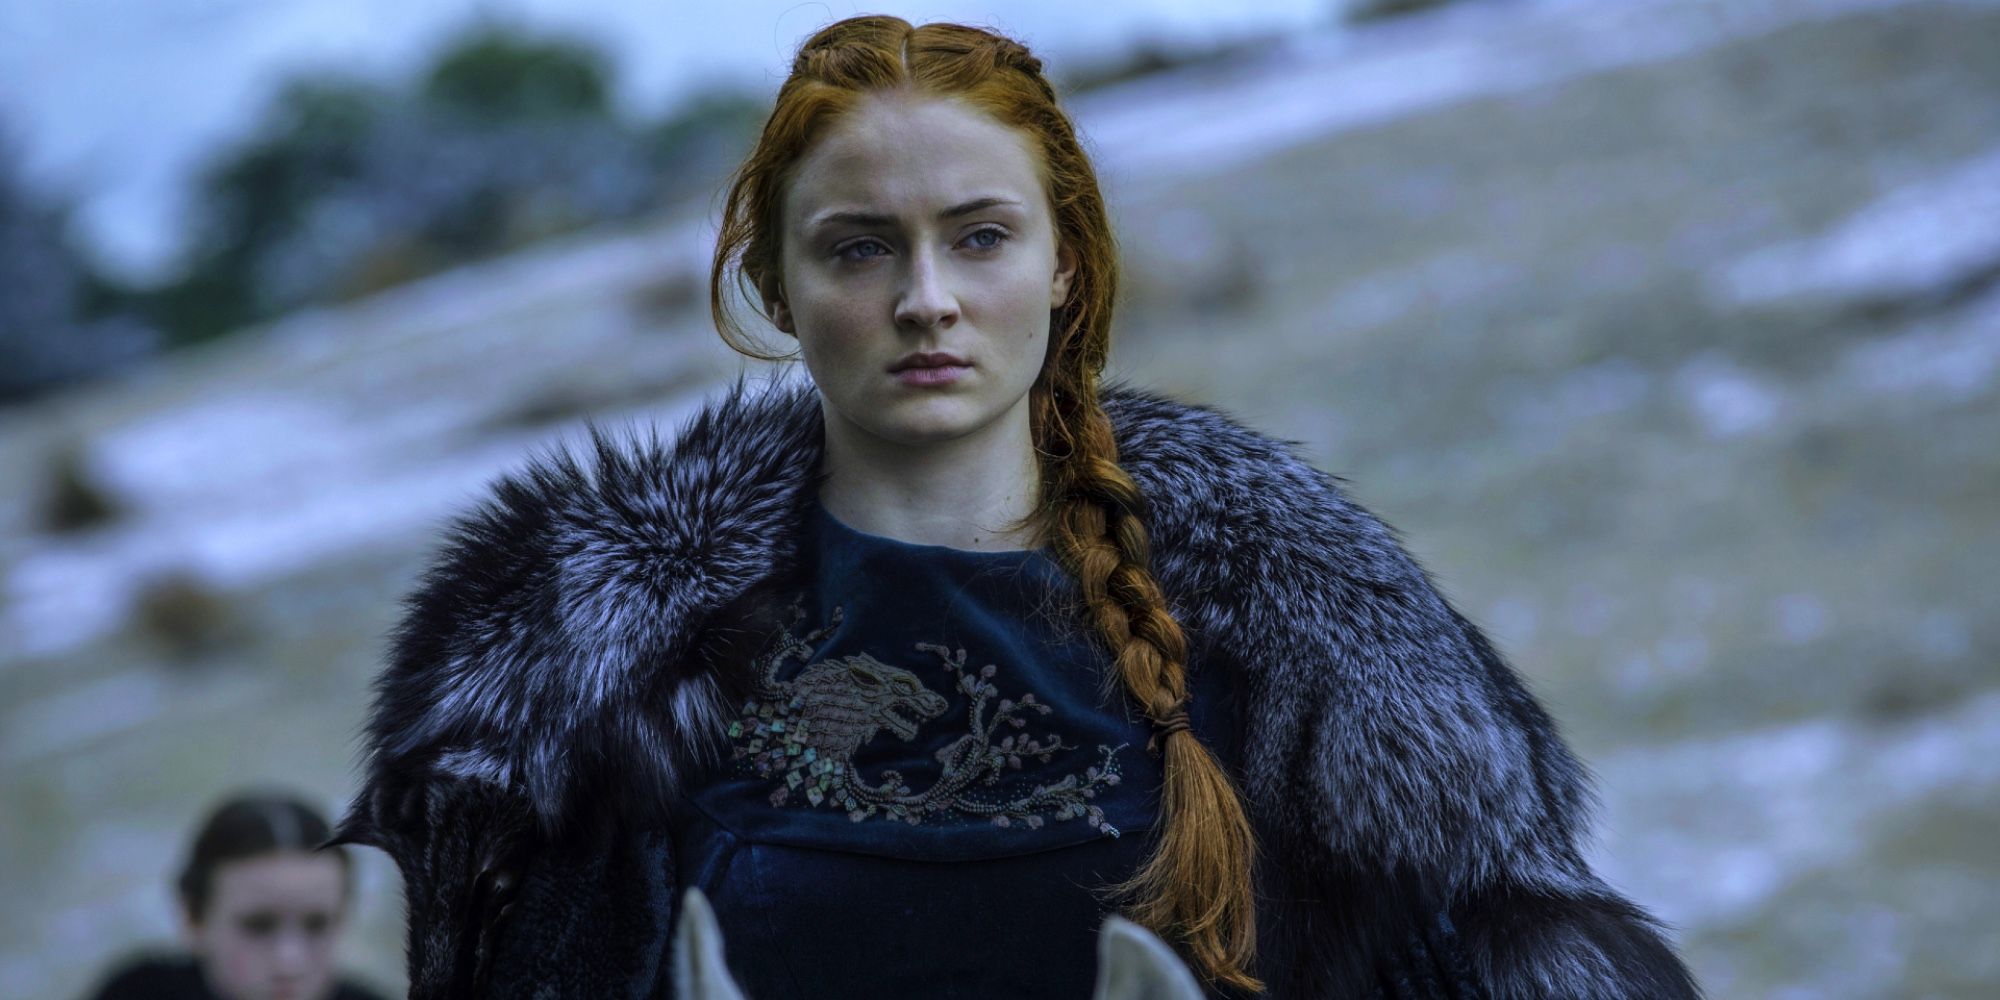 Sansa Stark riding a horse and looking serious in Game of Thrones